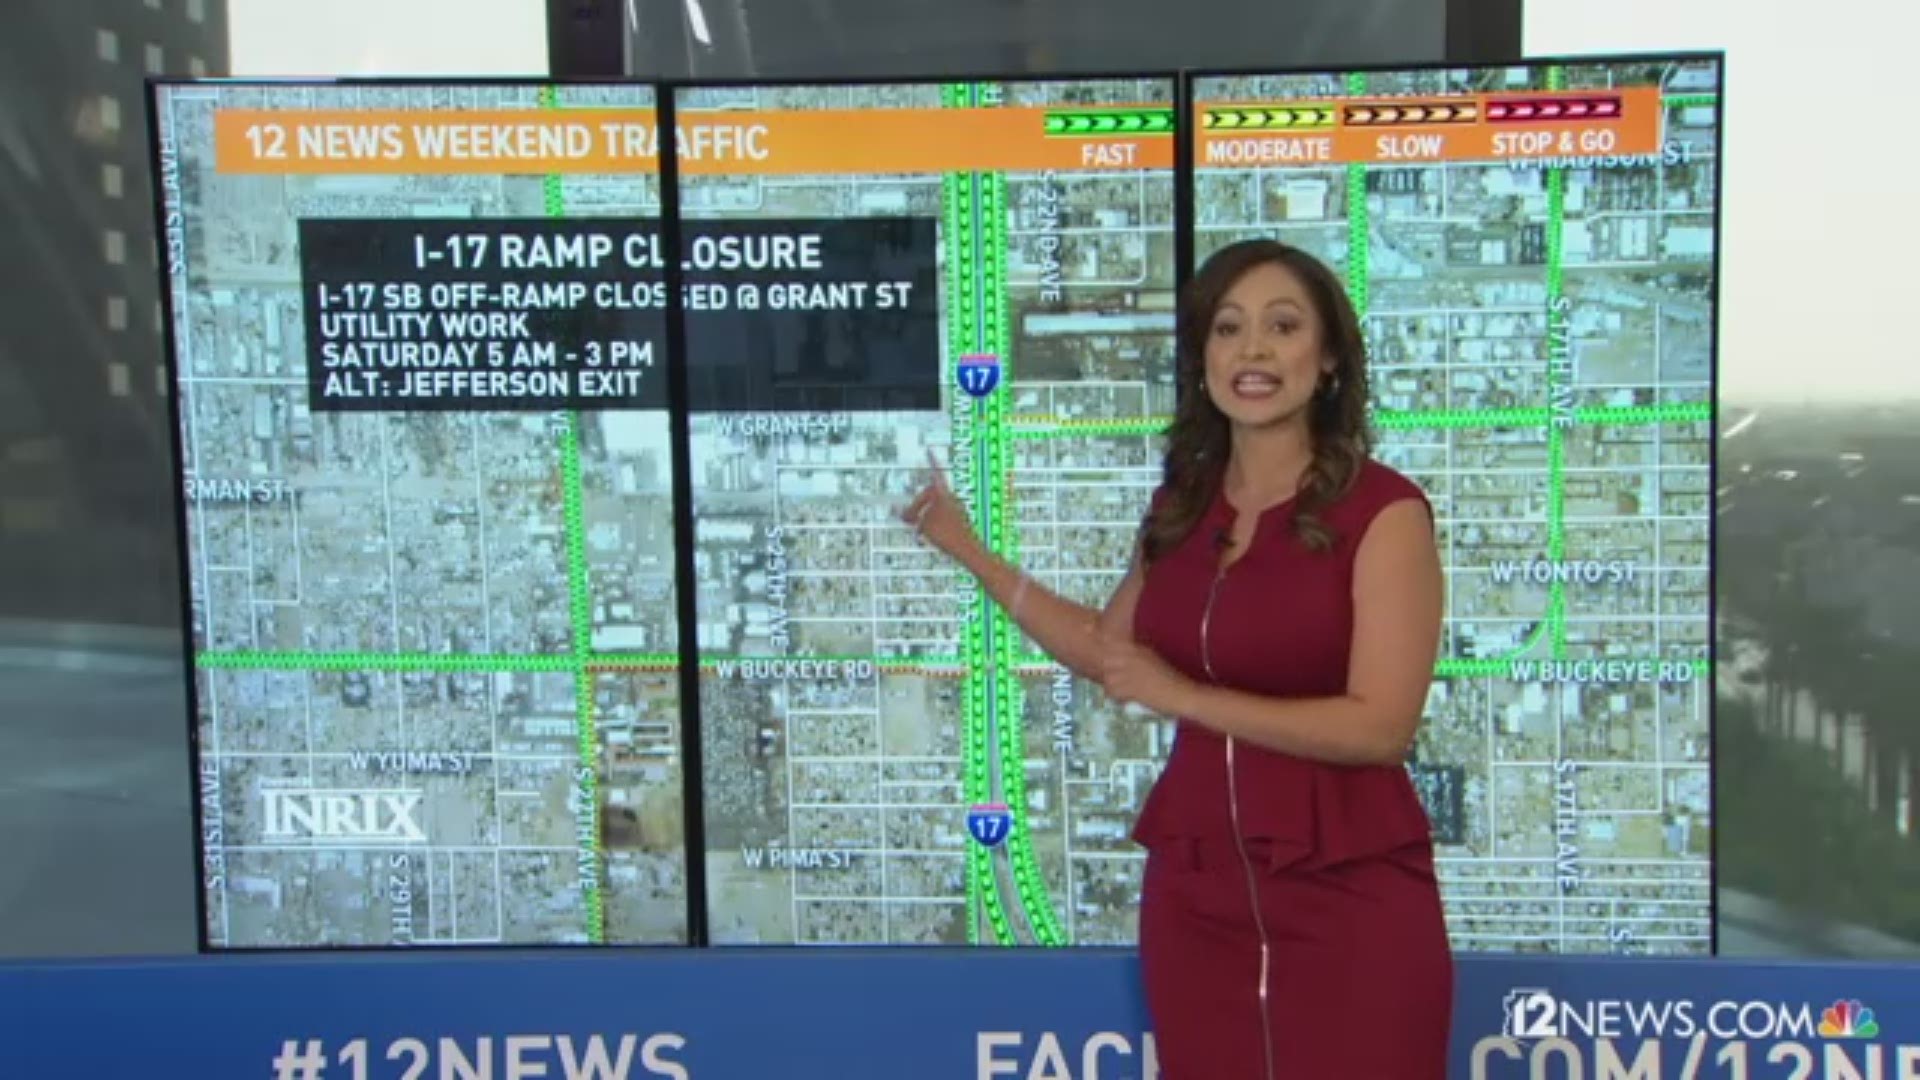 Pat's Run will tie up traffic in Tempe this week and west Phoenix drivers can expect closures on Interstate 10.